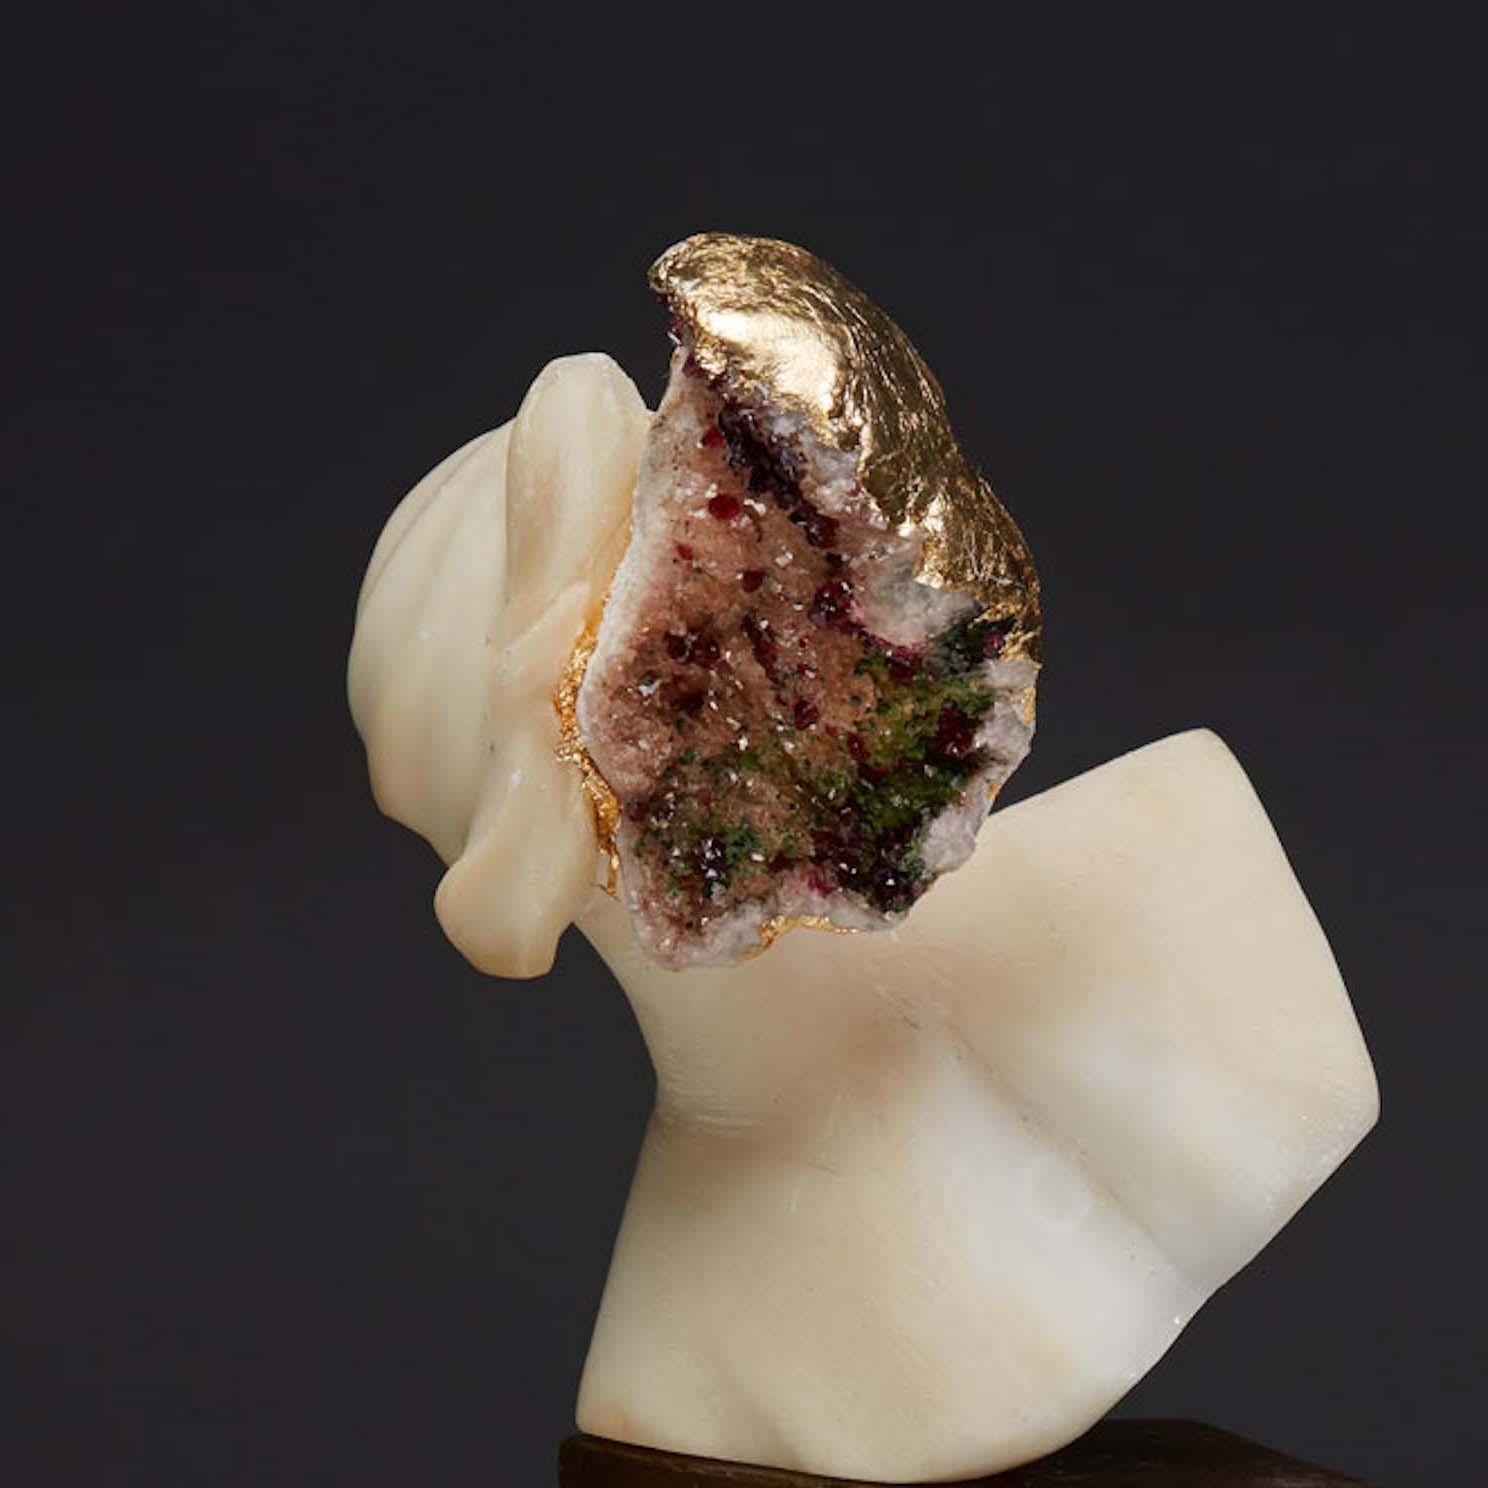 Debra Baxter is a sculptor and jewelry designer who combines carved alabaster with crystals, minerals, metals, and found objects. She received her MFA in Sculpture from Bard College in 2008 and her BFA from the Minneapolis College of Art and Design